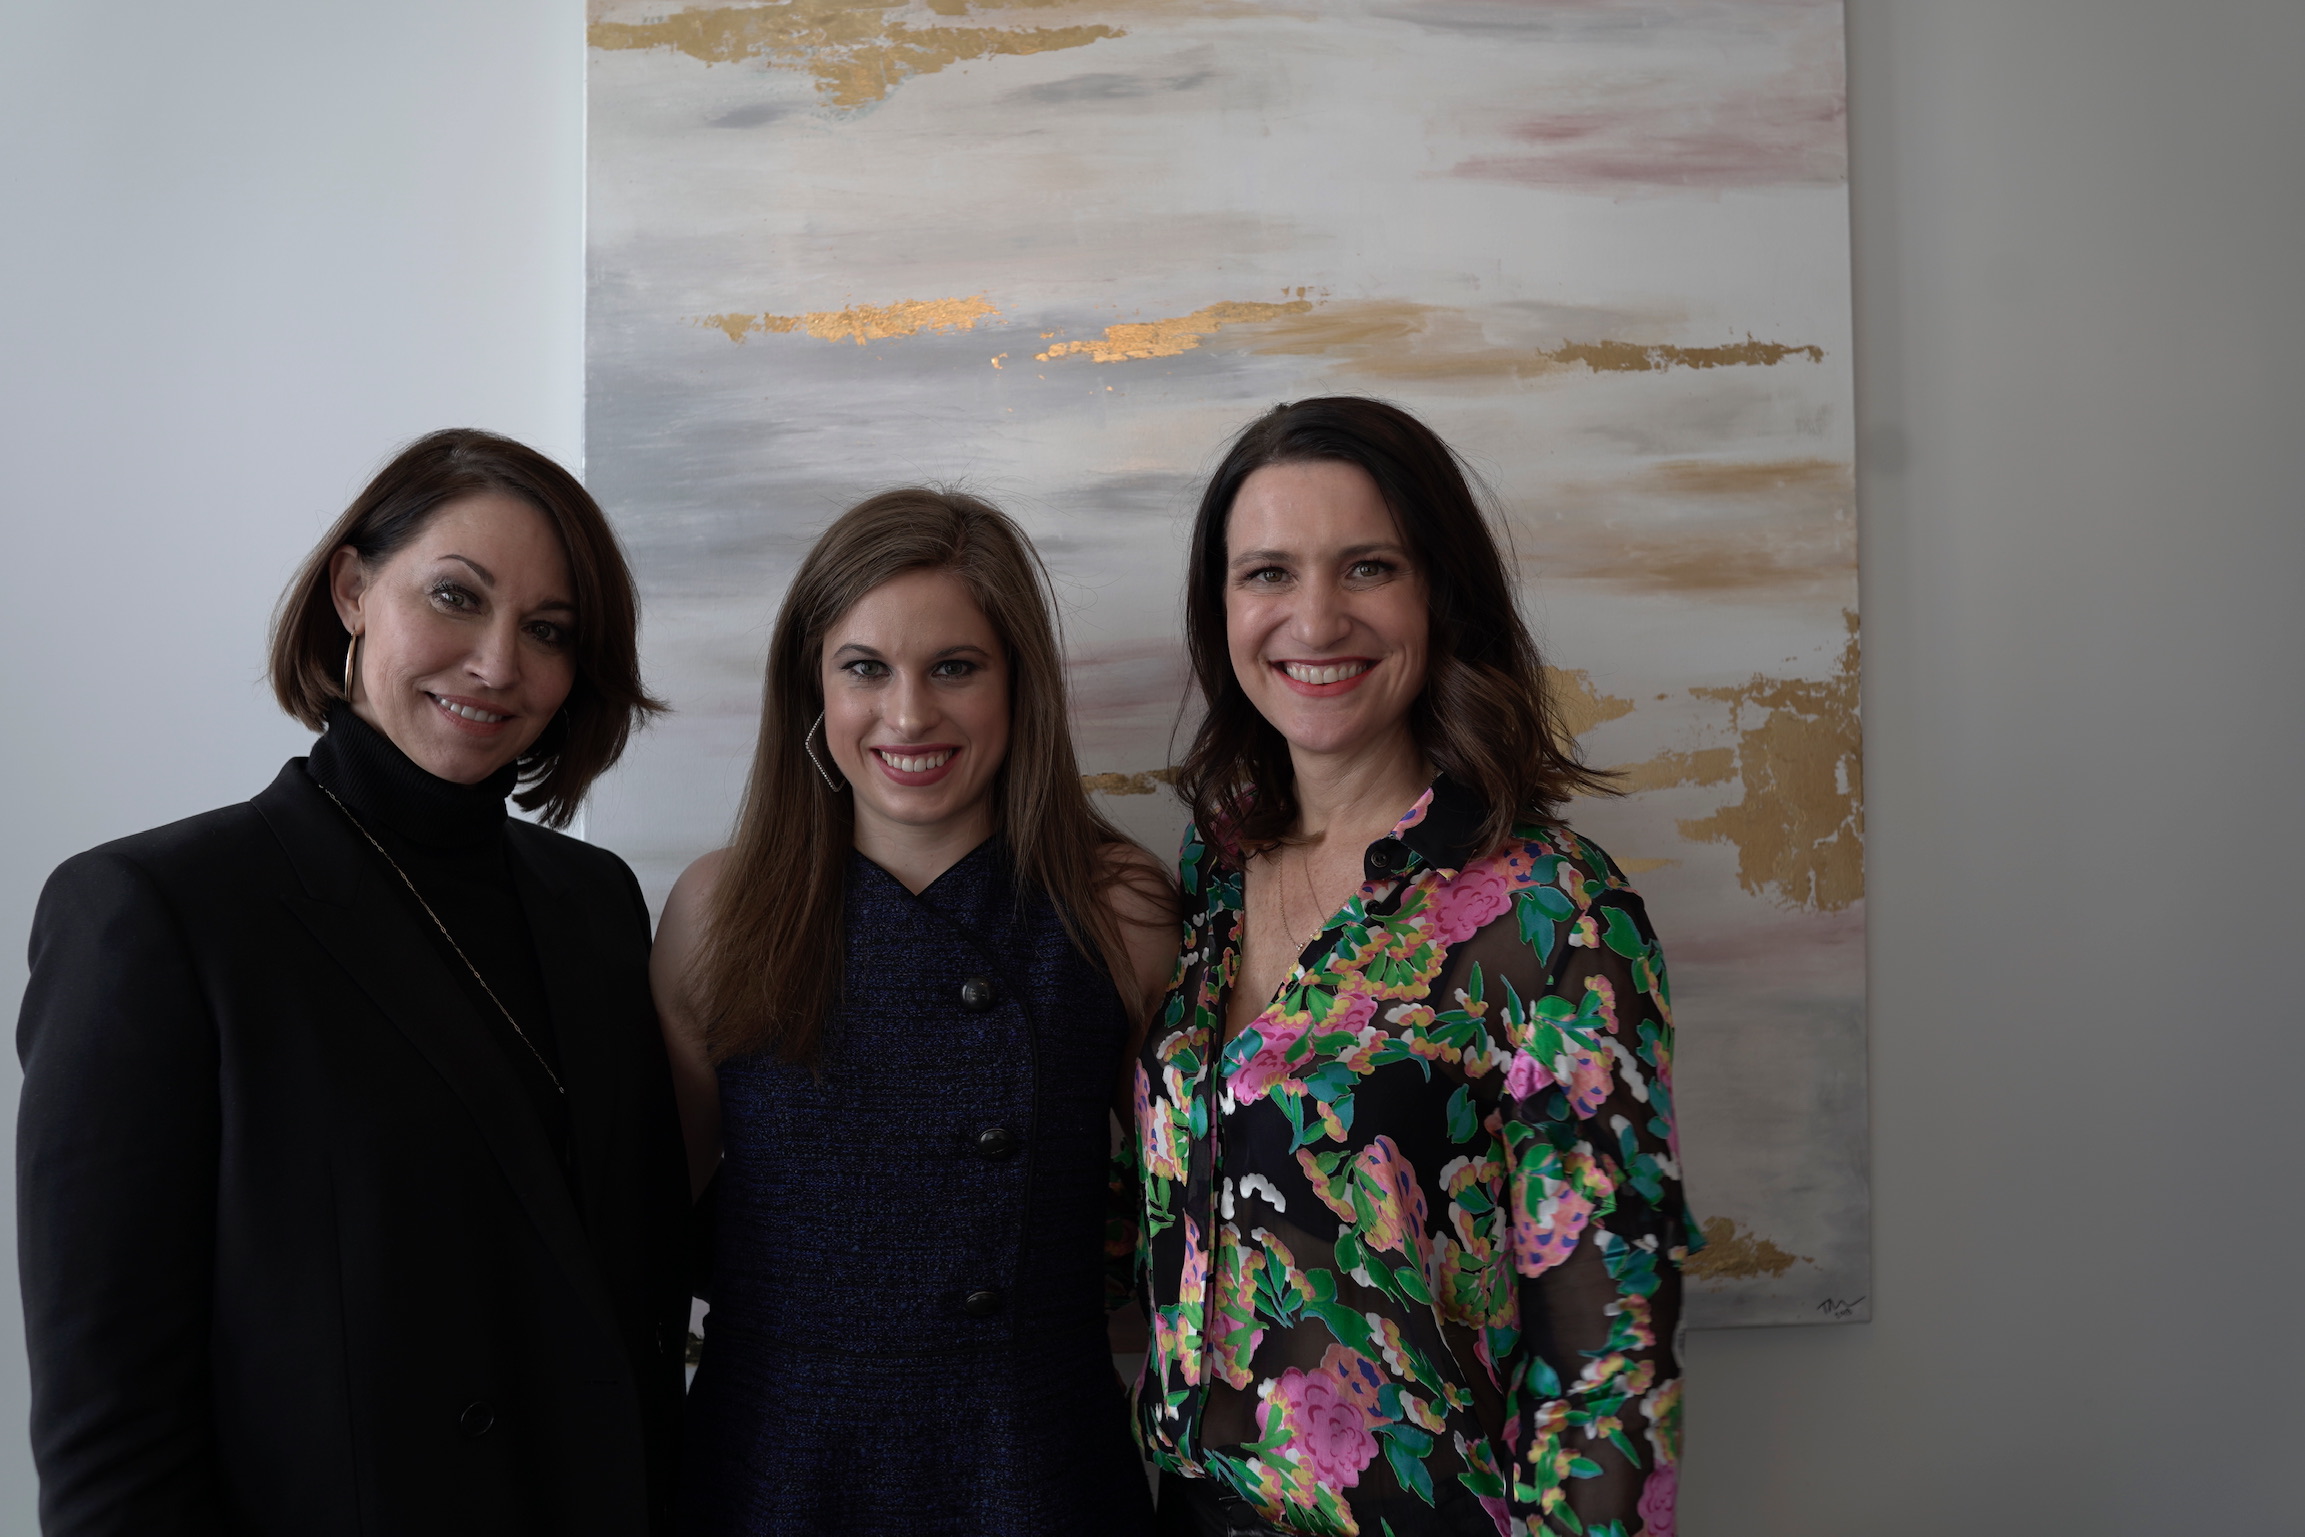 three women standing in front of a painting: one wearing a black blazer, one wearing a sleeveless blue dress and one wearing a printed silk top. All with brown hair